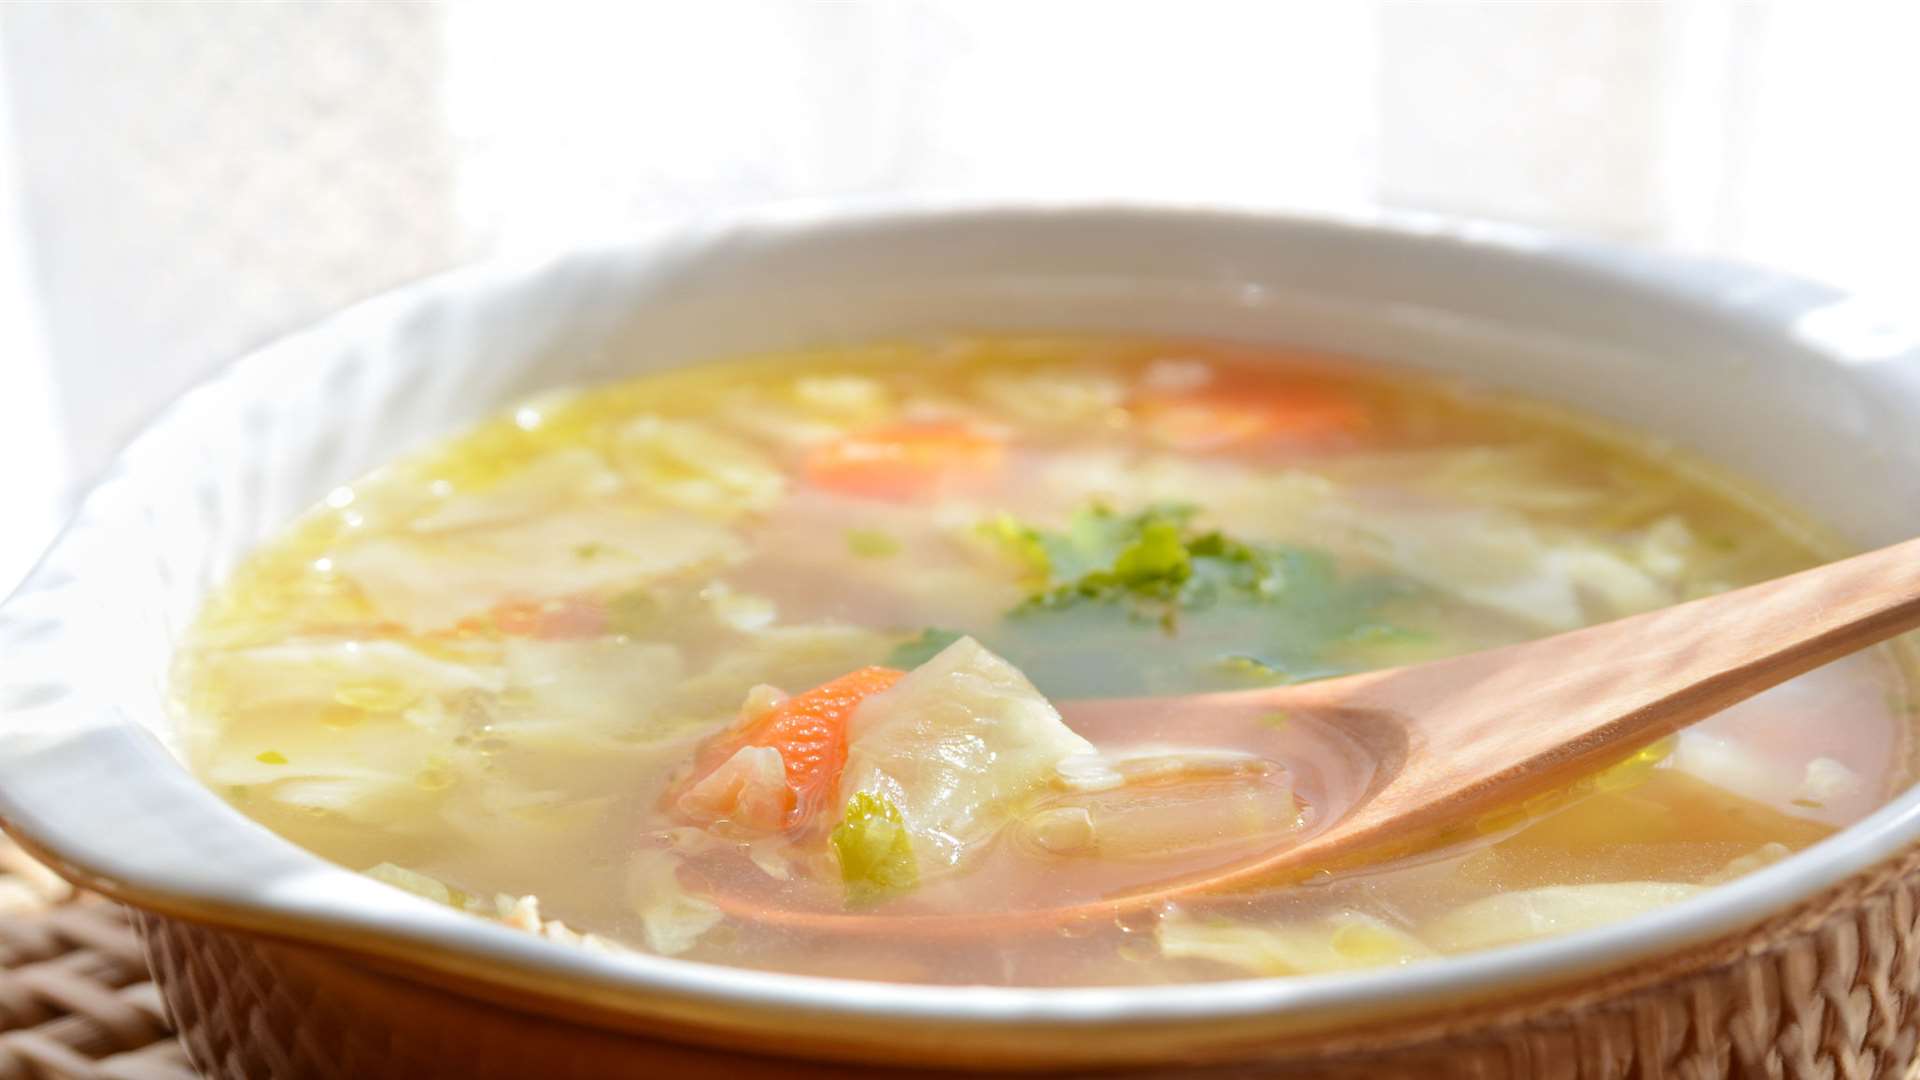 The cabbage soup diet works, temporarily, by cutting daily calories to near-starvation levels